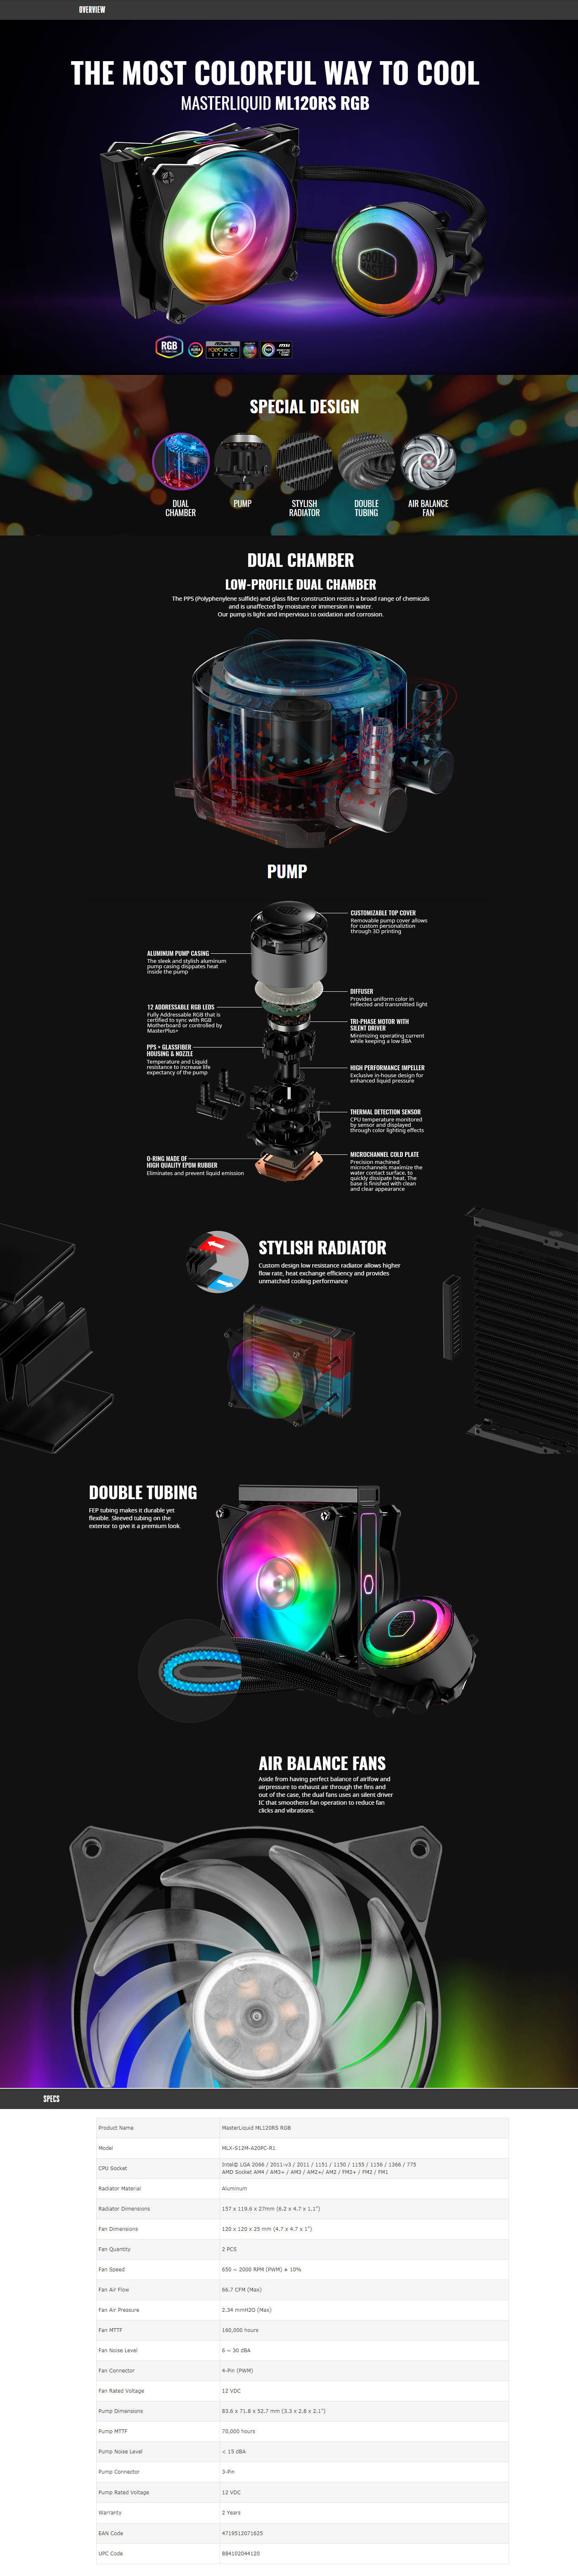  Buy Online Cooler Master MasterLiquid ML120RS RGB Cooler (MLX-S12M-A20PC-R1)